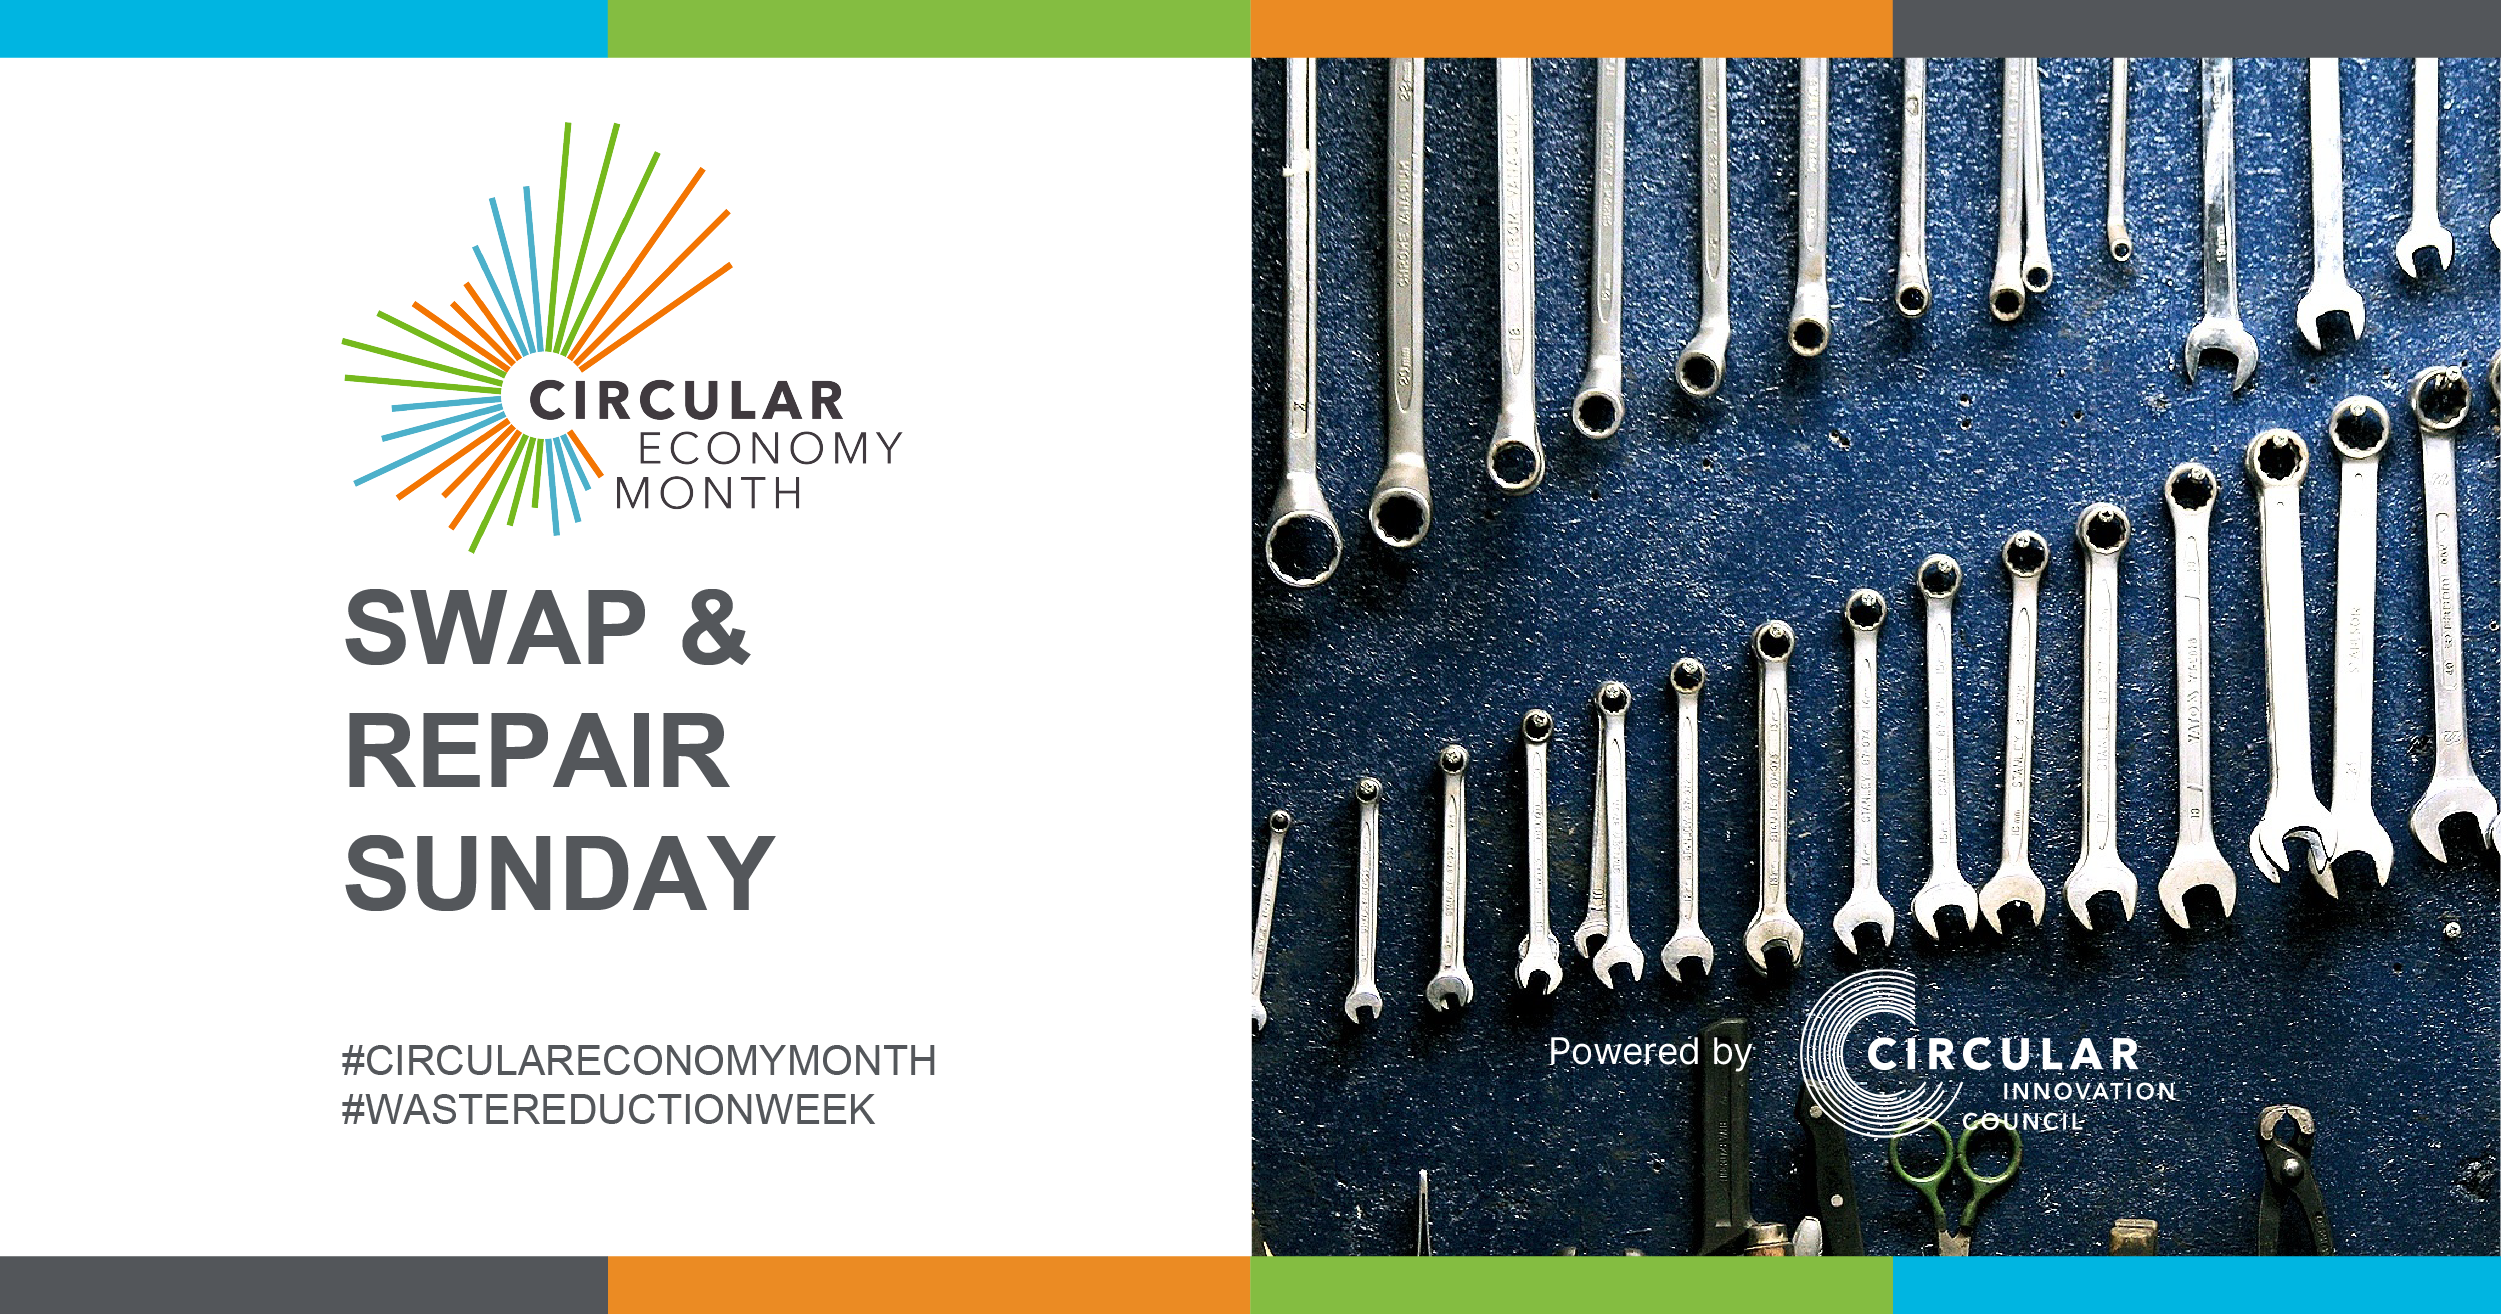 A series of varying-sized metal tools hang on a blue wall. Swap and Repair Sunday. #CircularEconomyMonth #WasteReductionWeek. Circular Economy Month, powered by Circular Innovation Council.